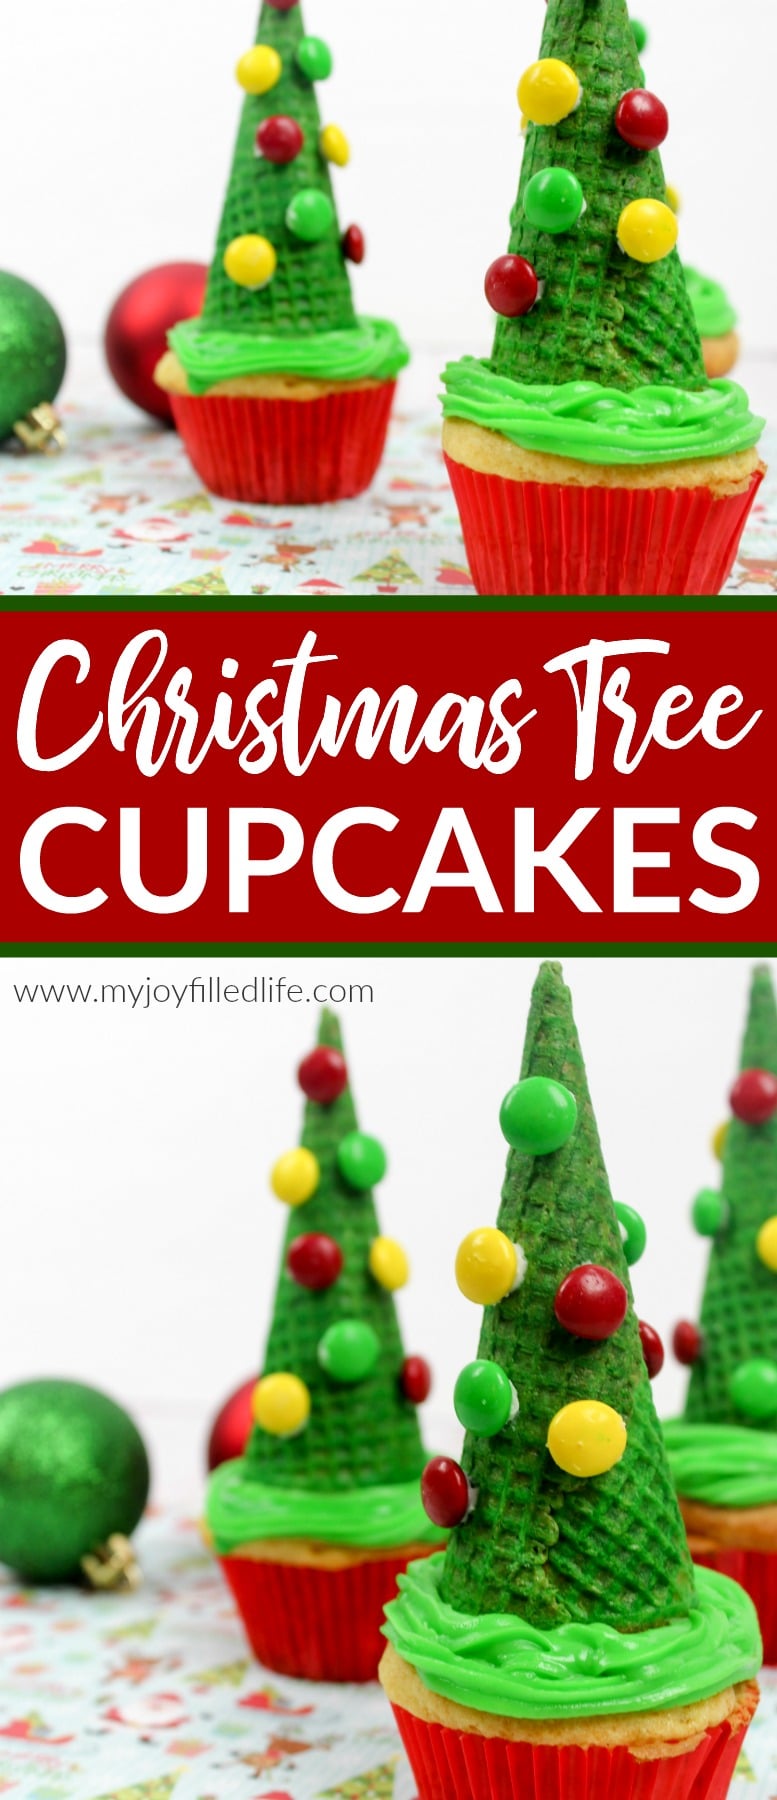 A fun and easy to make Christmas treat that will impress your guests - Christmas Tree Cupcakes